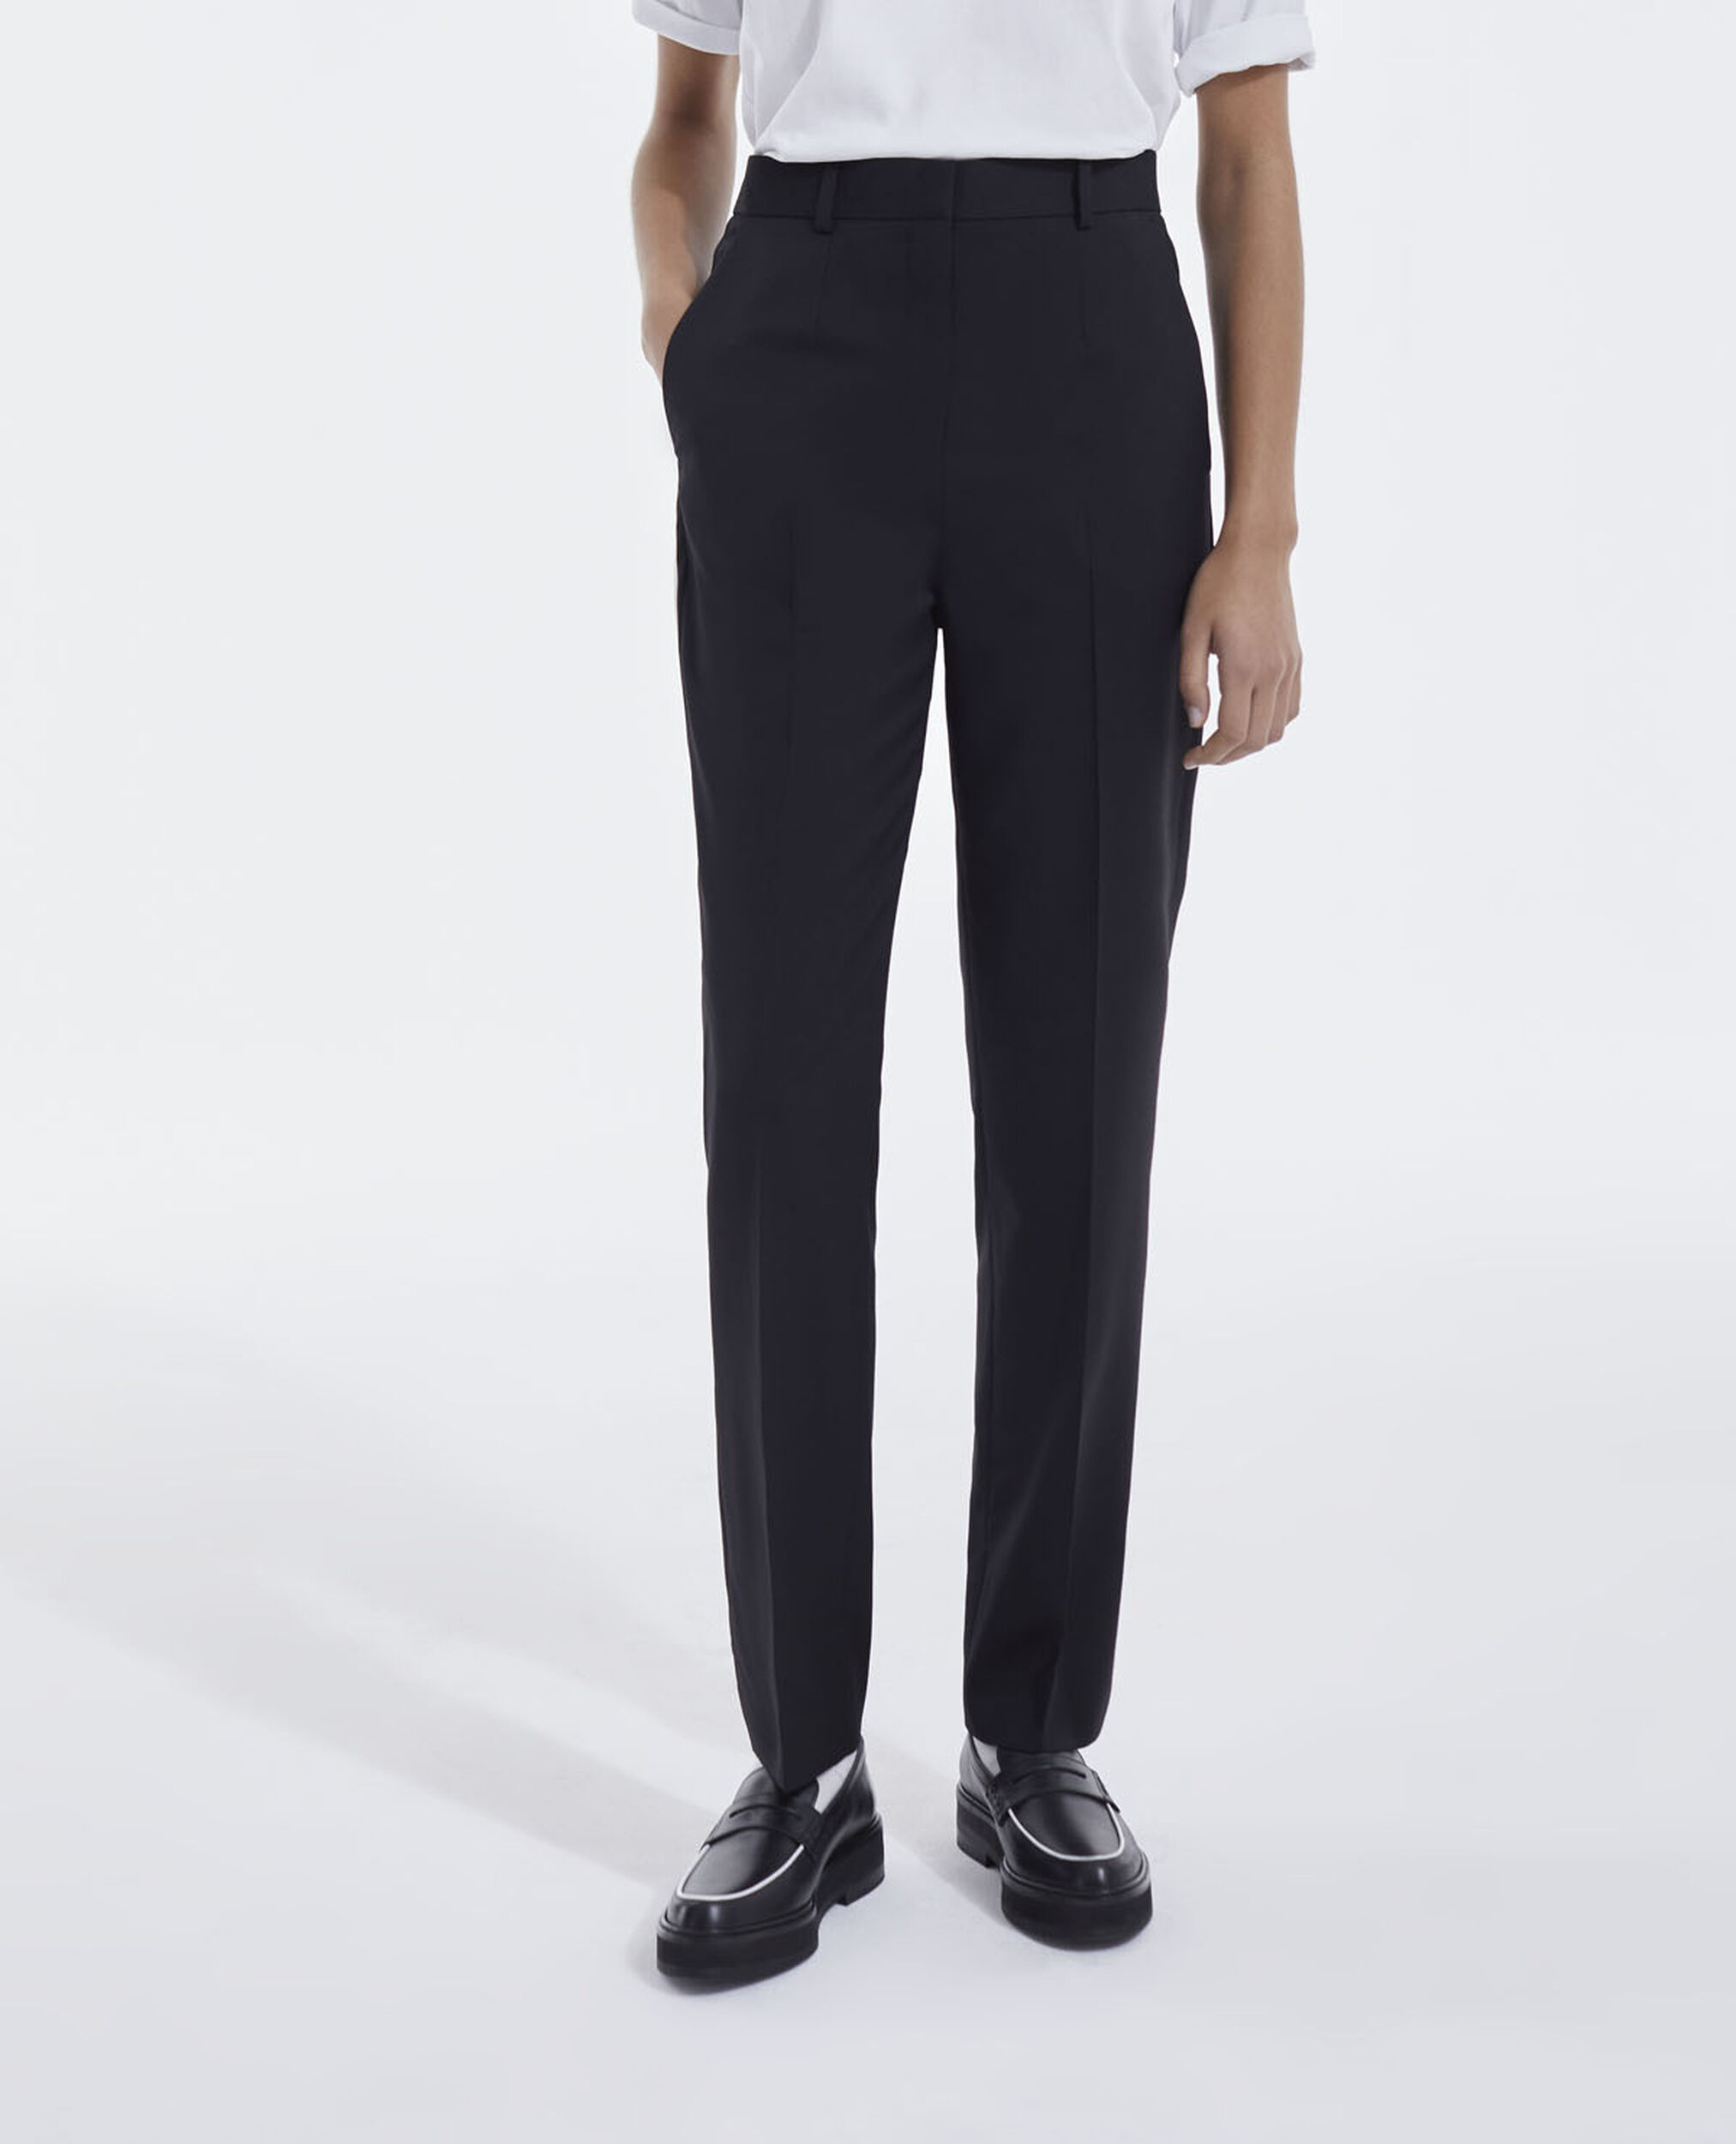 Black wool suit pants with leather details, BLACK, hi-res image number null